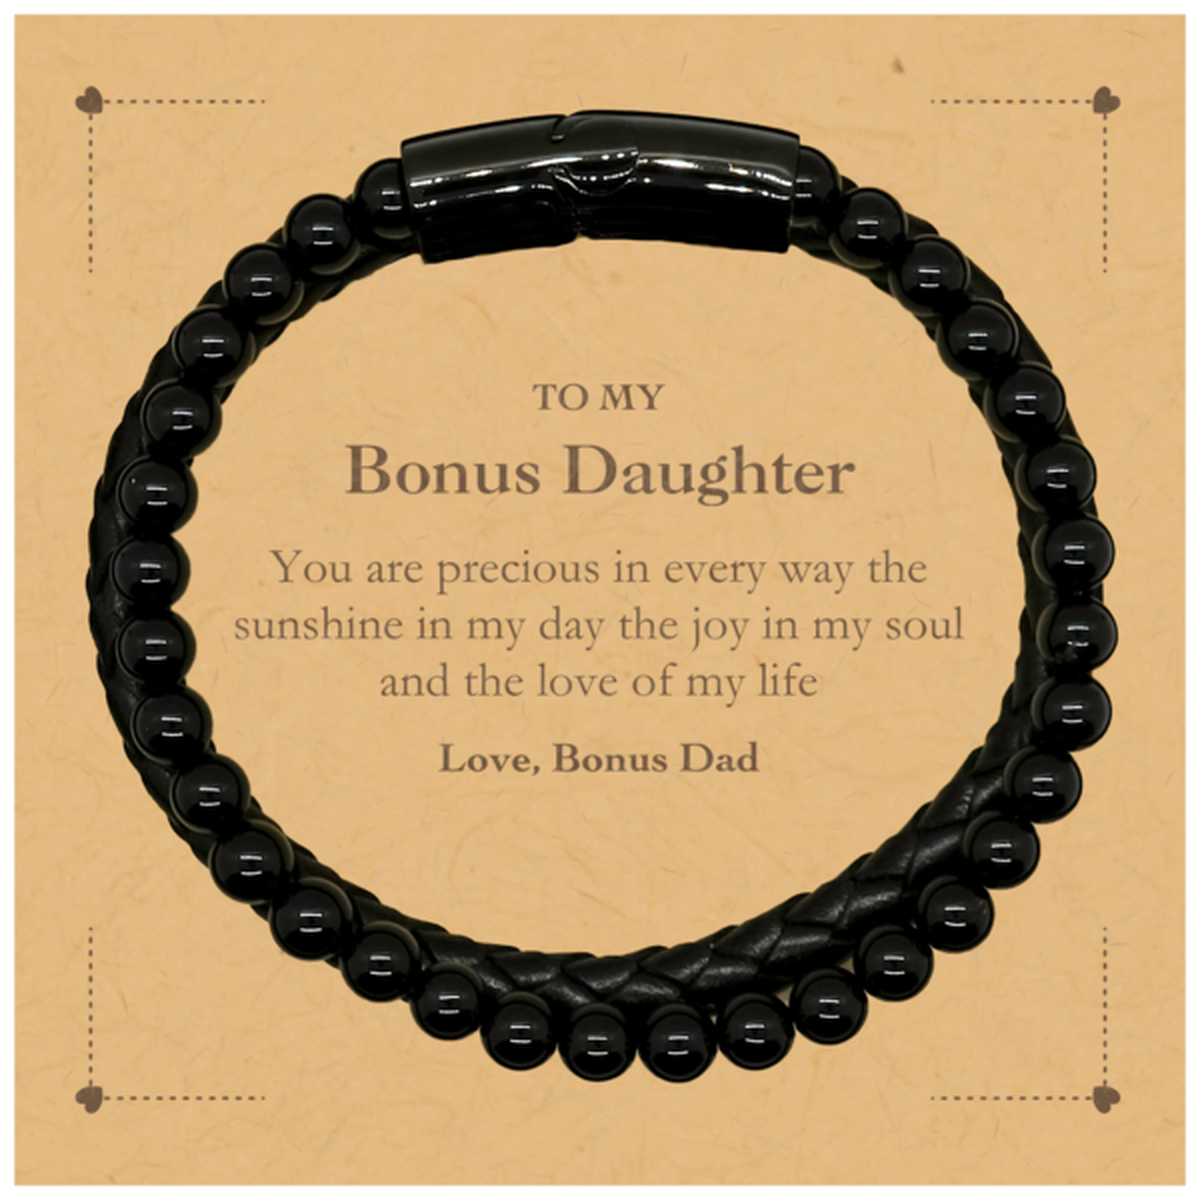 Graduation Gifts for Bonus Daughter Stone Leather Bracelets Present from Bonus Dad, Christmas Bonus Daughter Birthday Gifts Bonus Daughter You are precious in every way the sunshine in my day. Love, Bonus Dad